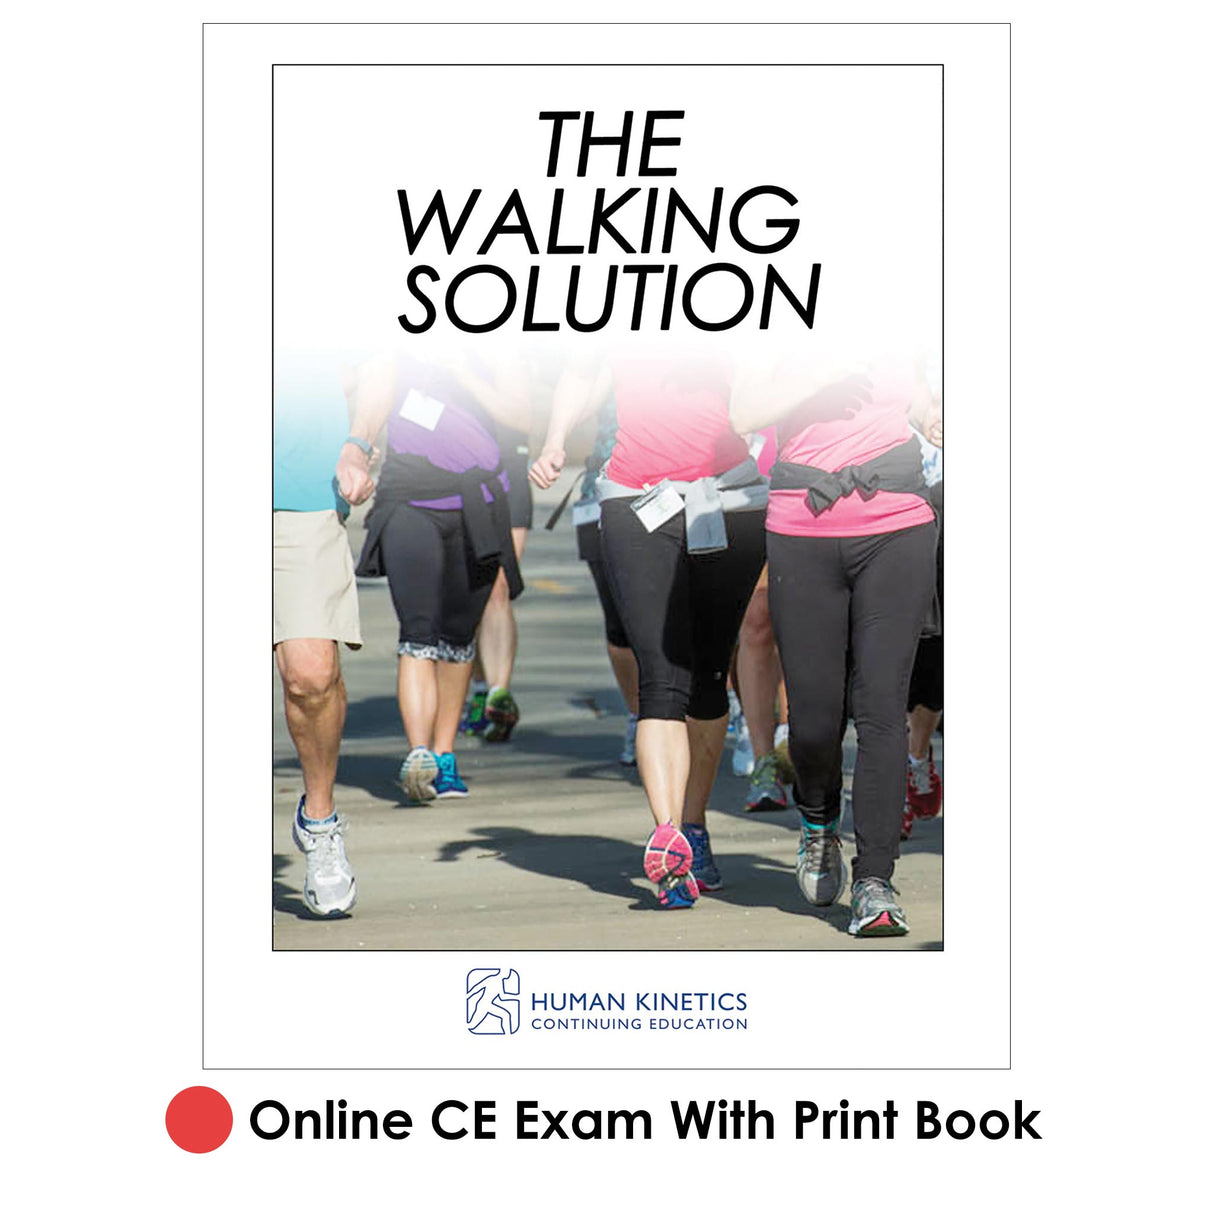 Walking Solution Online CE Exam With Print Book, The